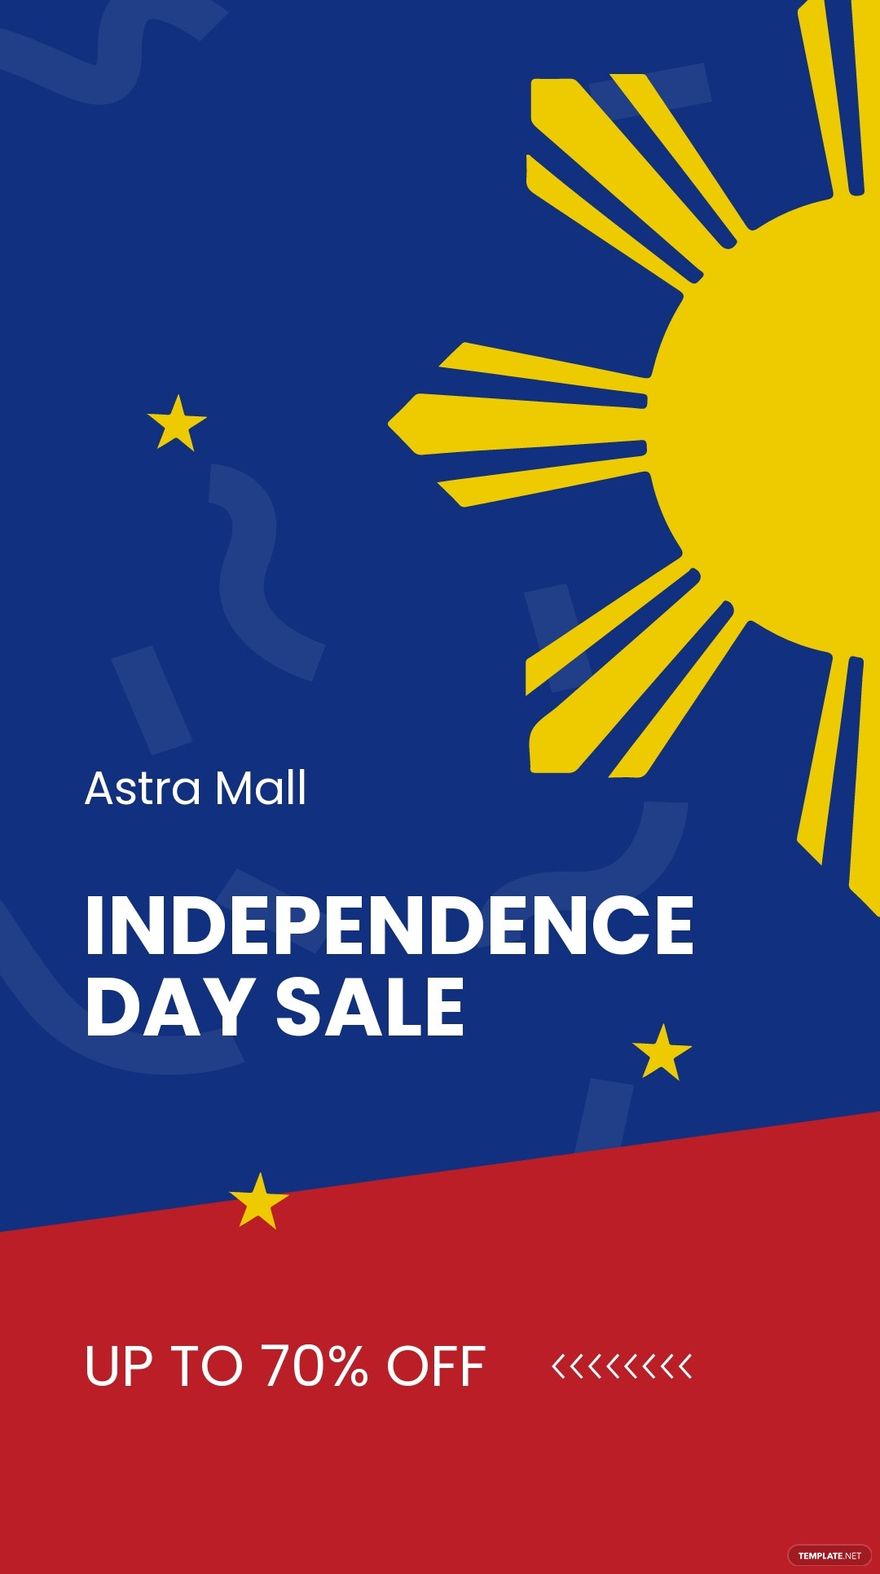 Philippines Independence Day Sale Whatsapp Post Template.jpe